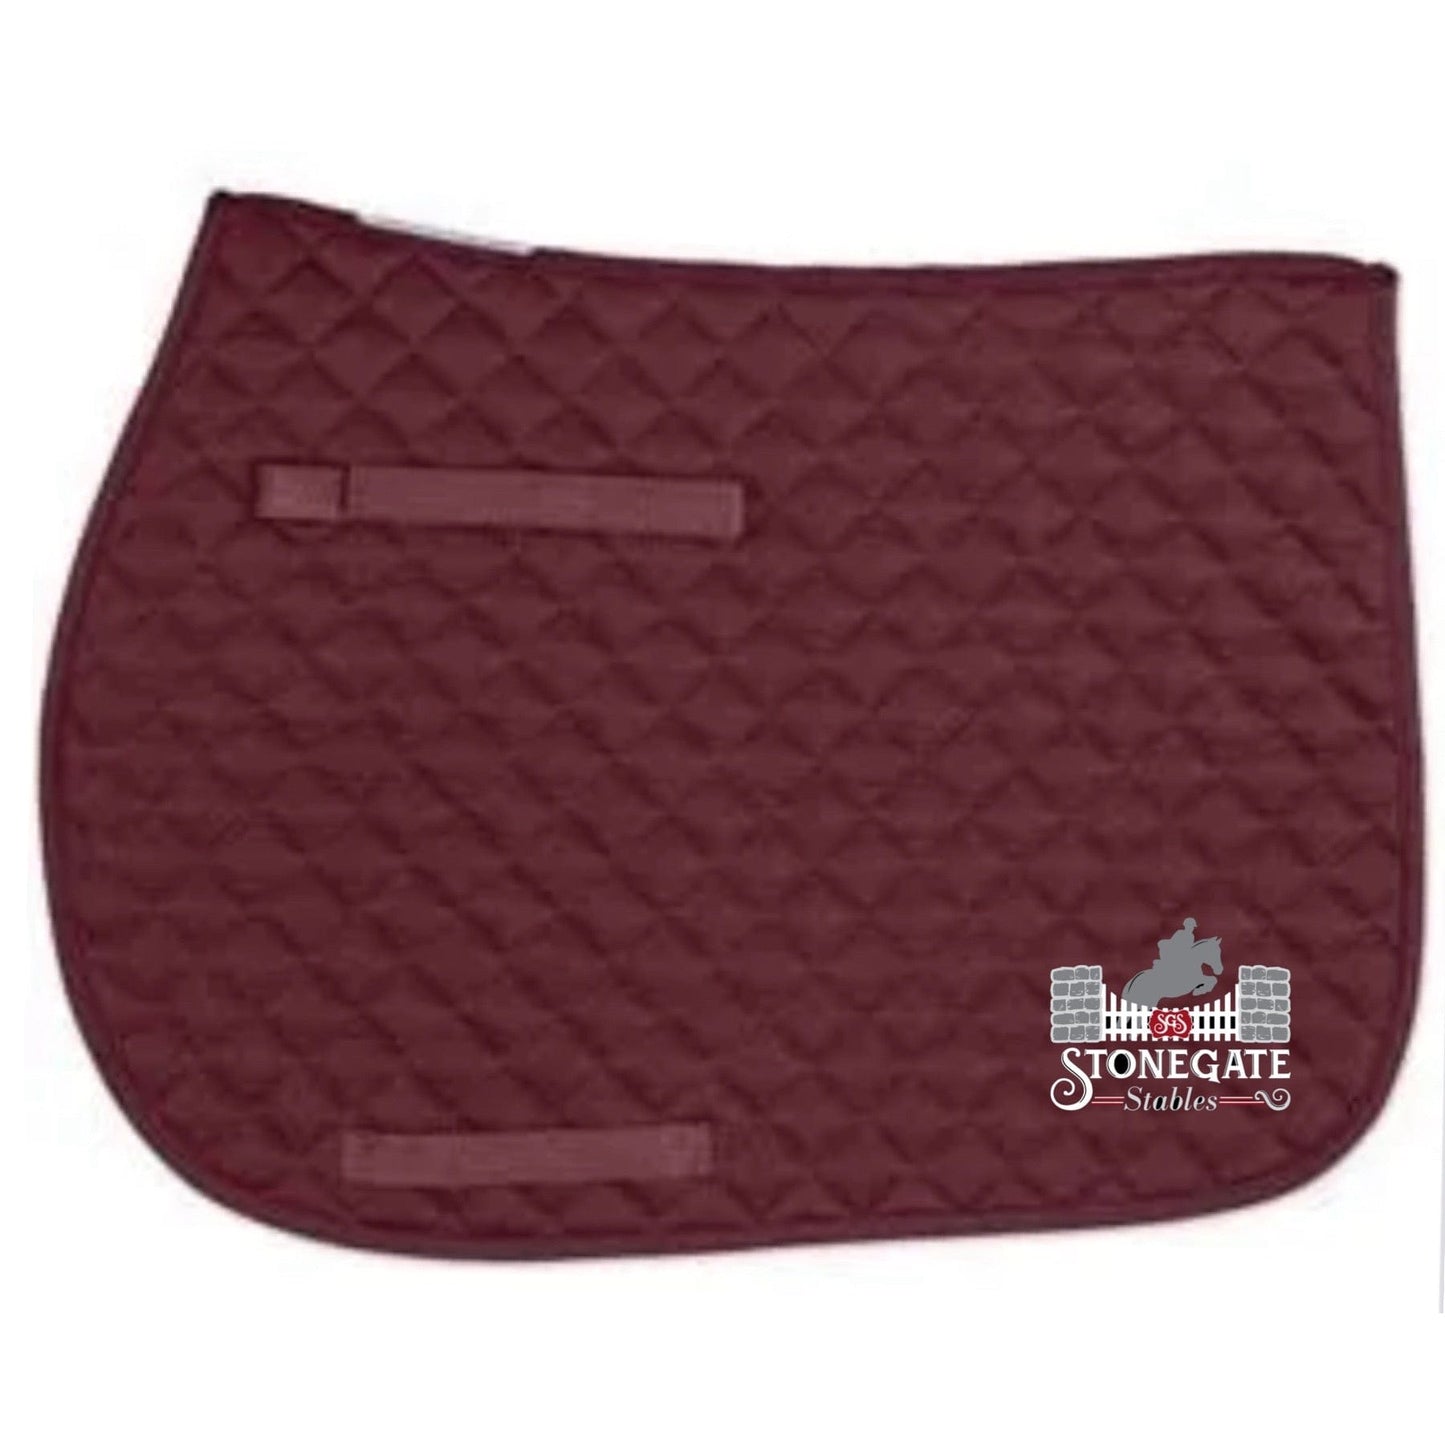 Equestrian Team Apparel Stonegate Stables Saddles Pad equestrian team apparel online tack store mobile tack store custom farm apparel custom show stable clothing equestrian lifestyle horse show clothing riding clothes horses equestrian tack store